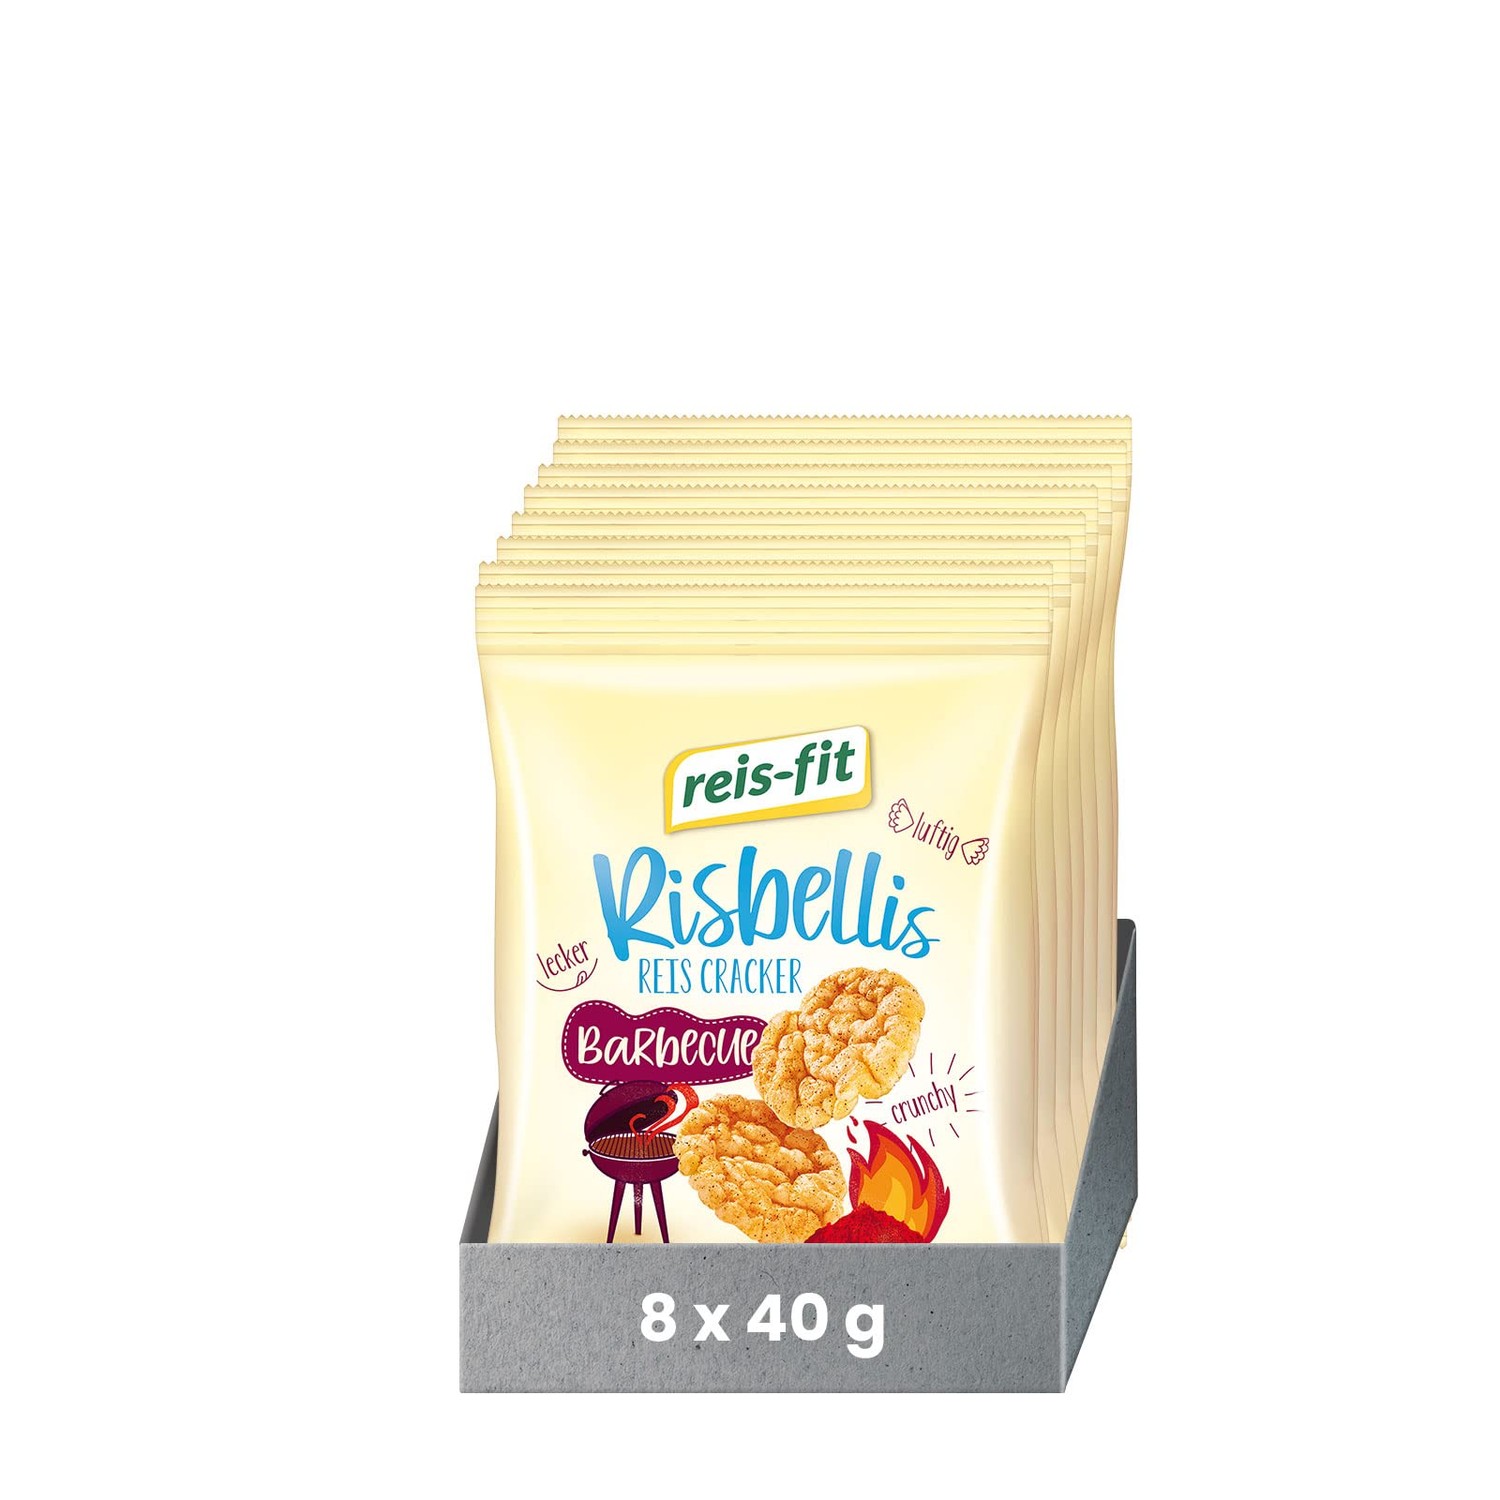 reis-fit Risbellis Barbecue 8 x 40 g, Gluten-Free, Vegan, Crispy, Rice  Waffle Snack for on the Go